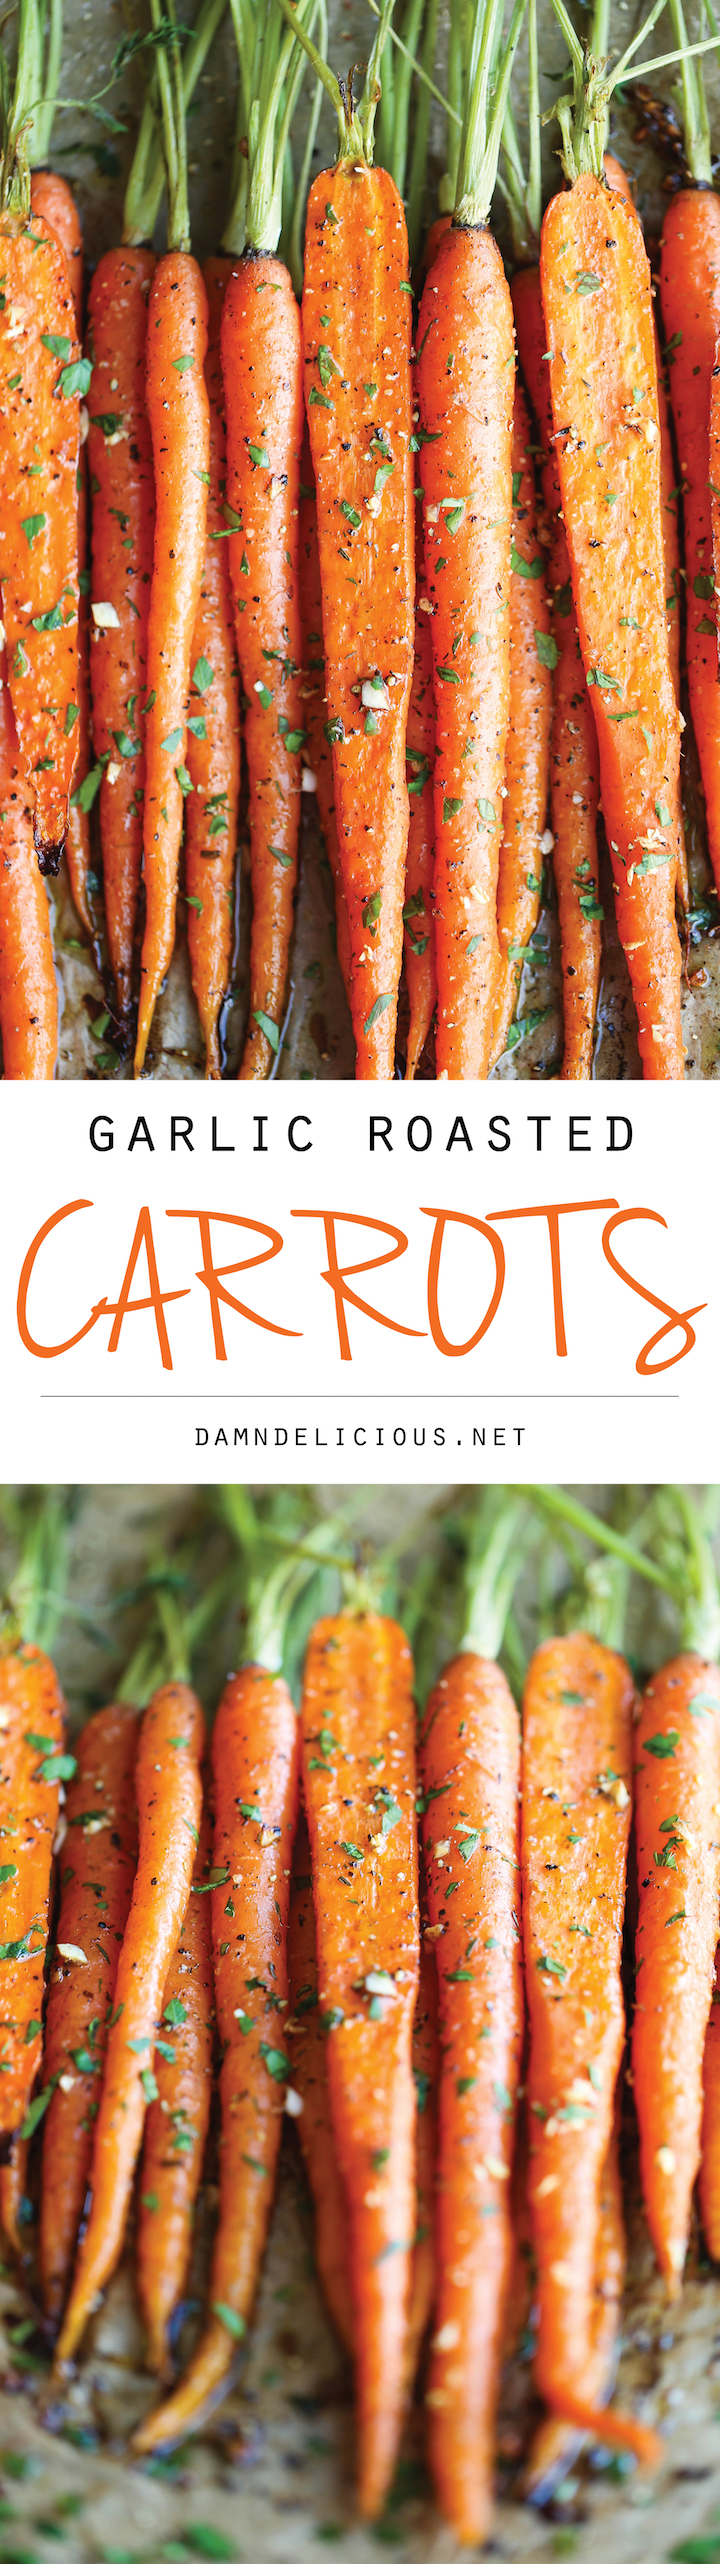 Garlic Roasted Carrots - This is really the best and easiest way to roast carrots. All you need is 5 min prep. It is just that quick and easy! 59.5 calories.